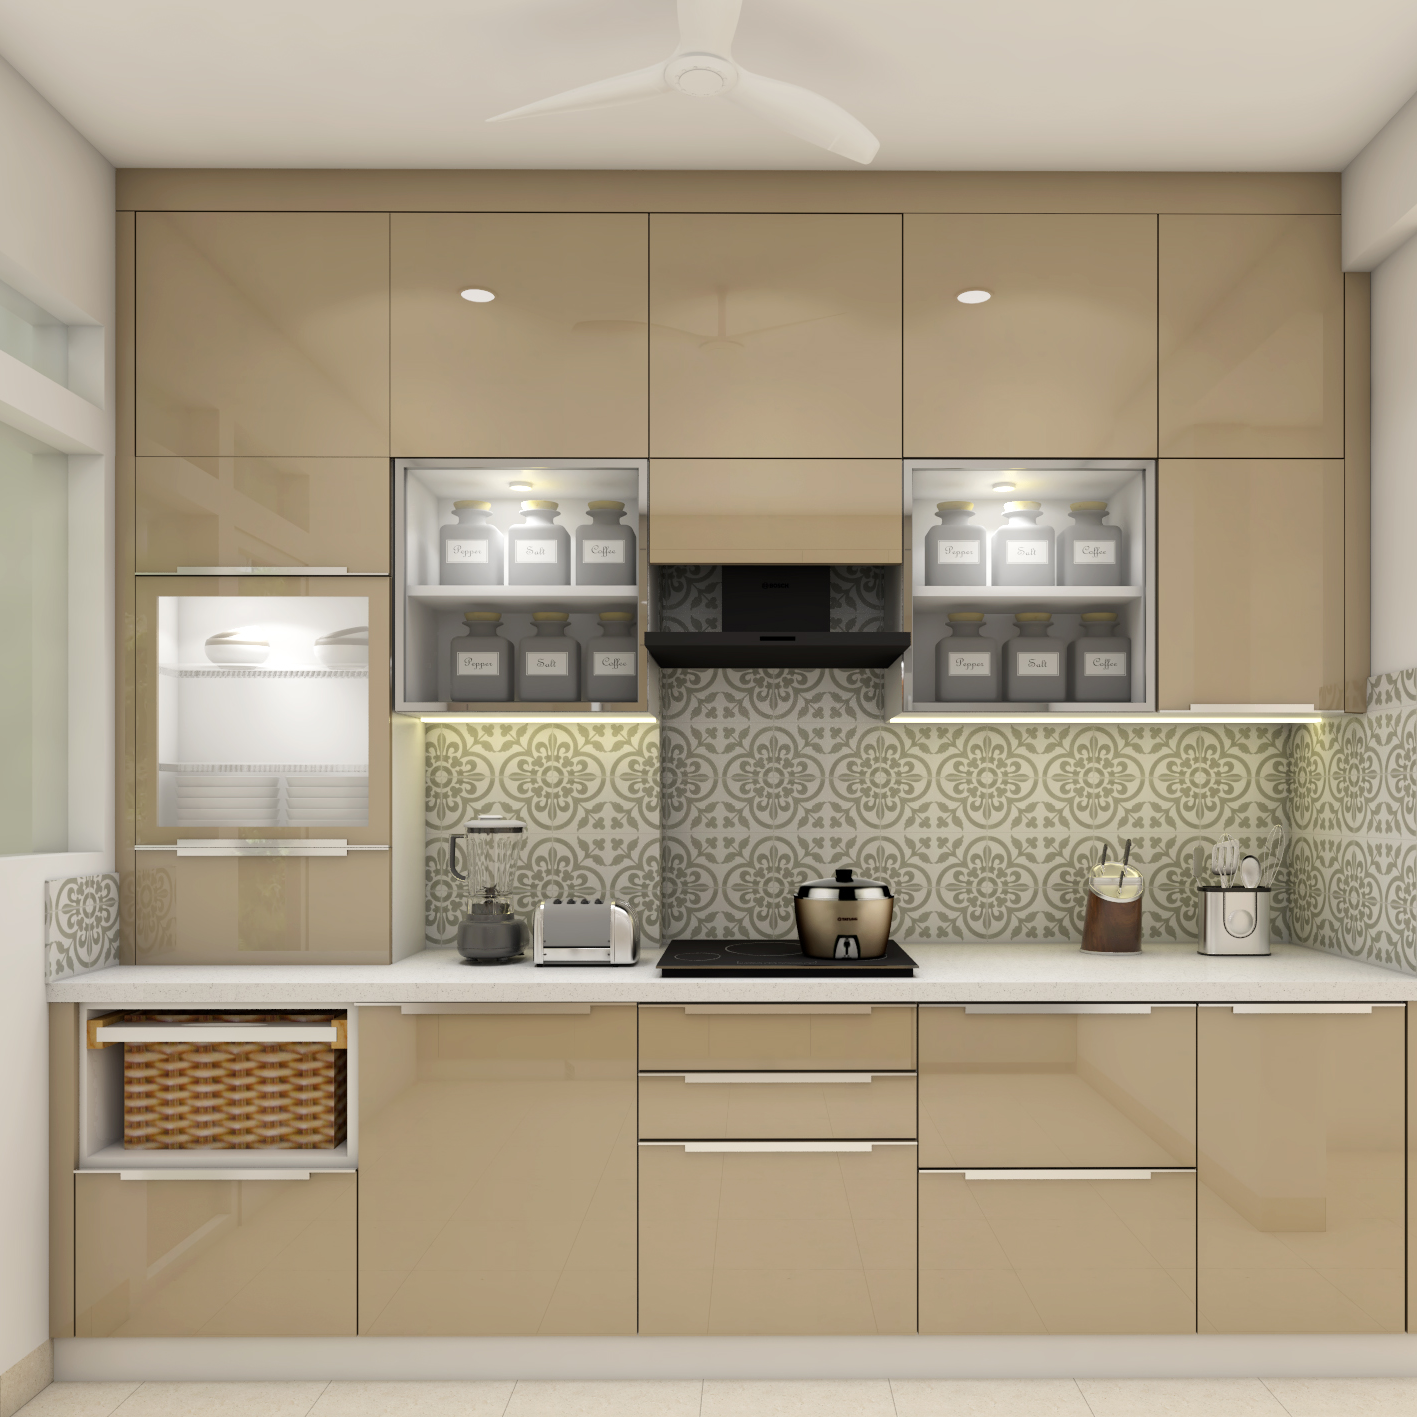 Contemporary Parallel Kitchen Design With Glossy Laminates